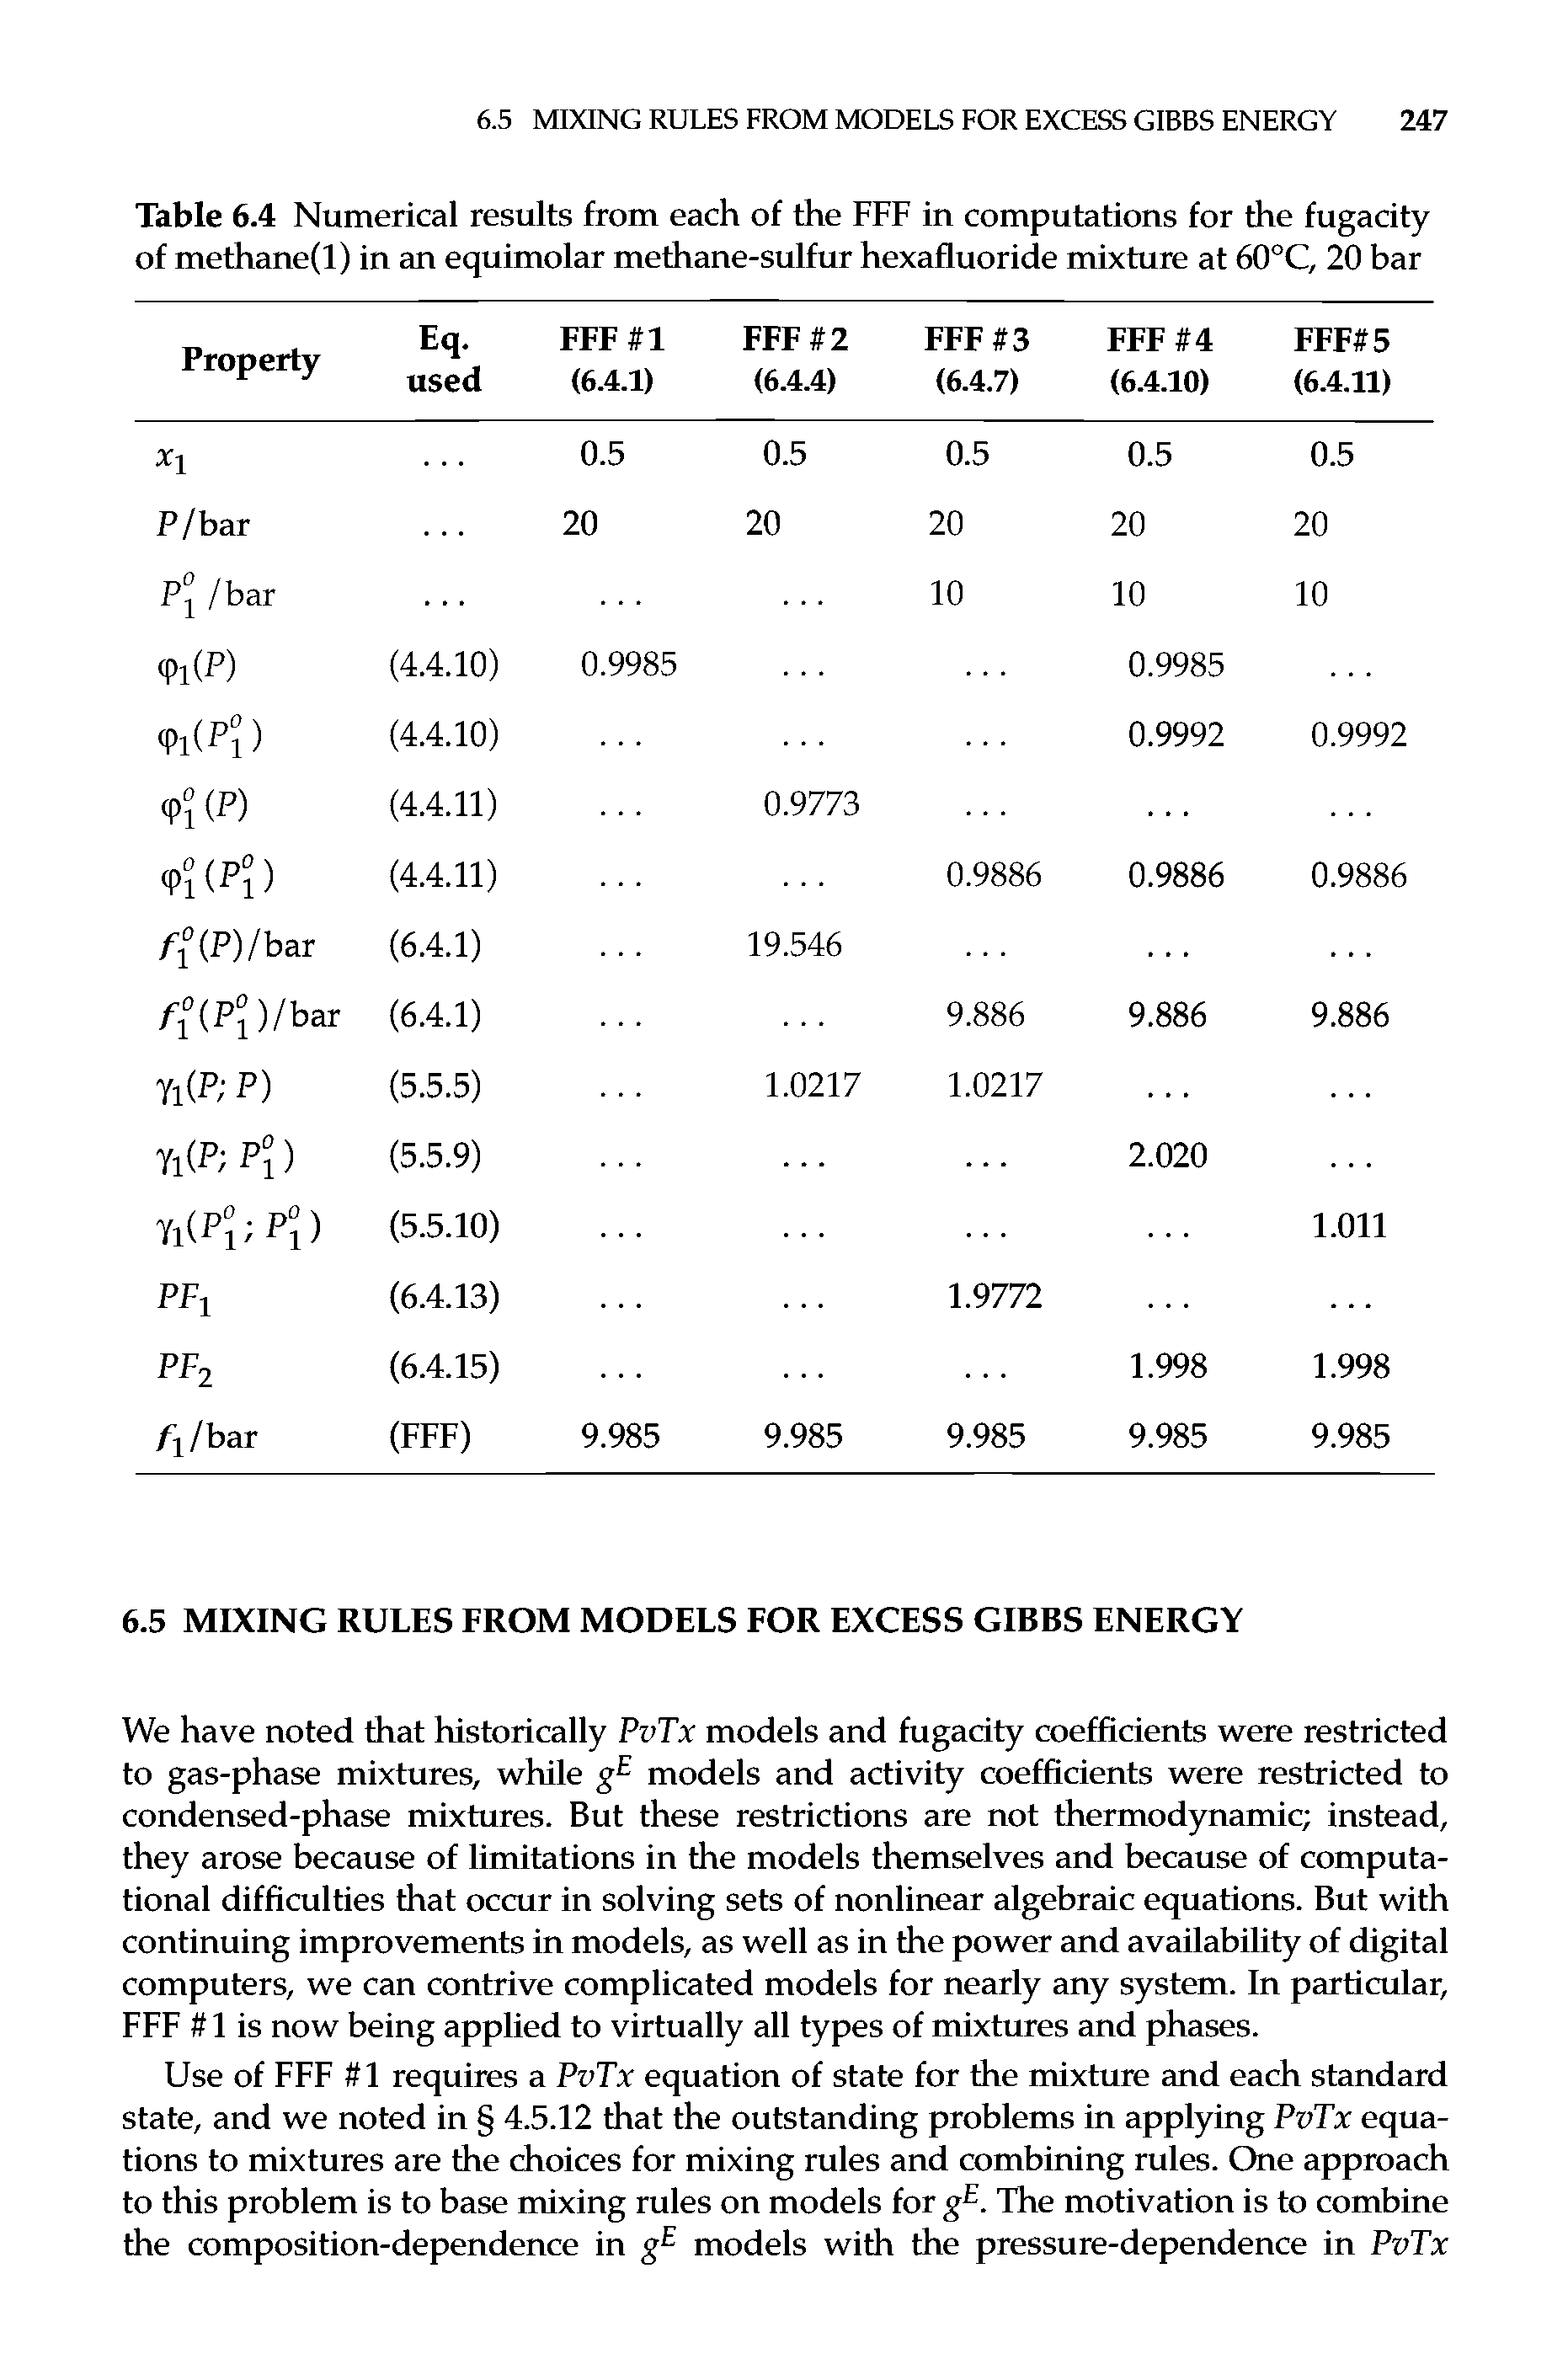 Table 6.4 Numerical results from each of the FFF in computations for the fugacity of methane(l) in an equimolar methane-sulfur hexafluoride mixture at 60°C, 20 bar...